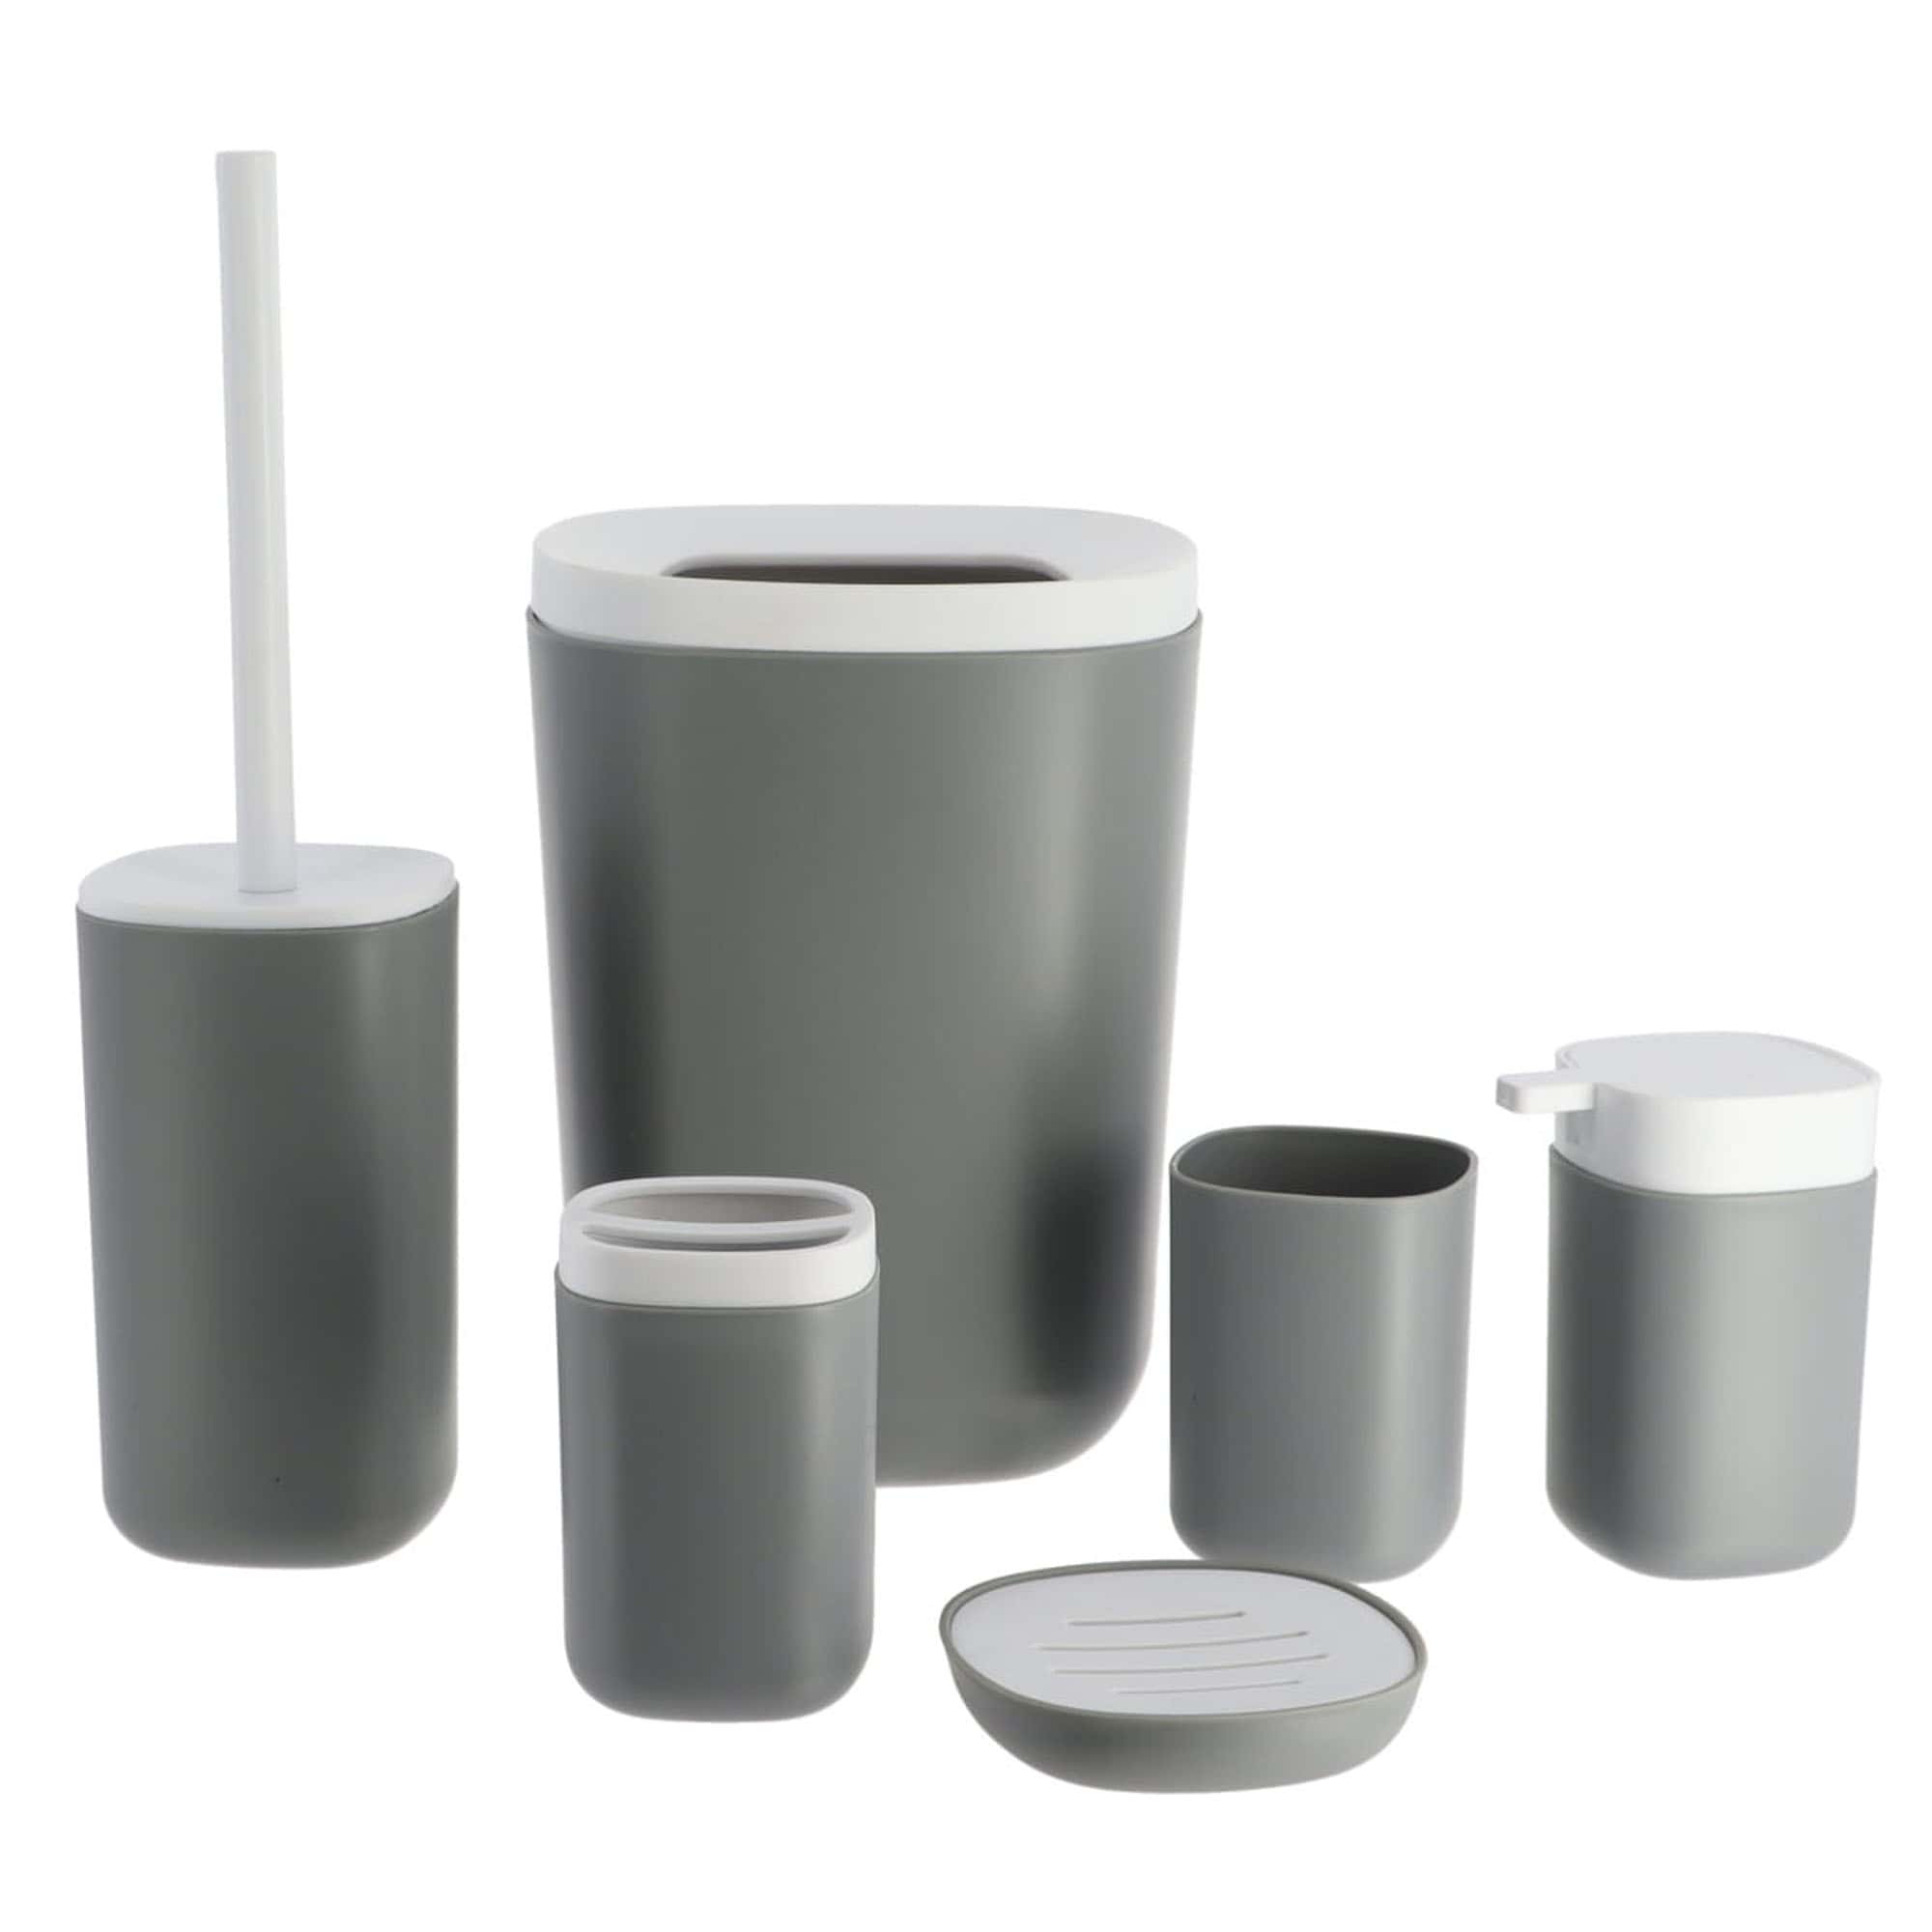 Complete bathroom accessories set in gray and white with trash can, toilet brush set, toothbrush holder, tumbler, soap cup, liquid soap pump